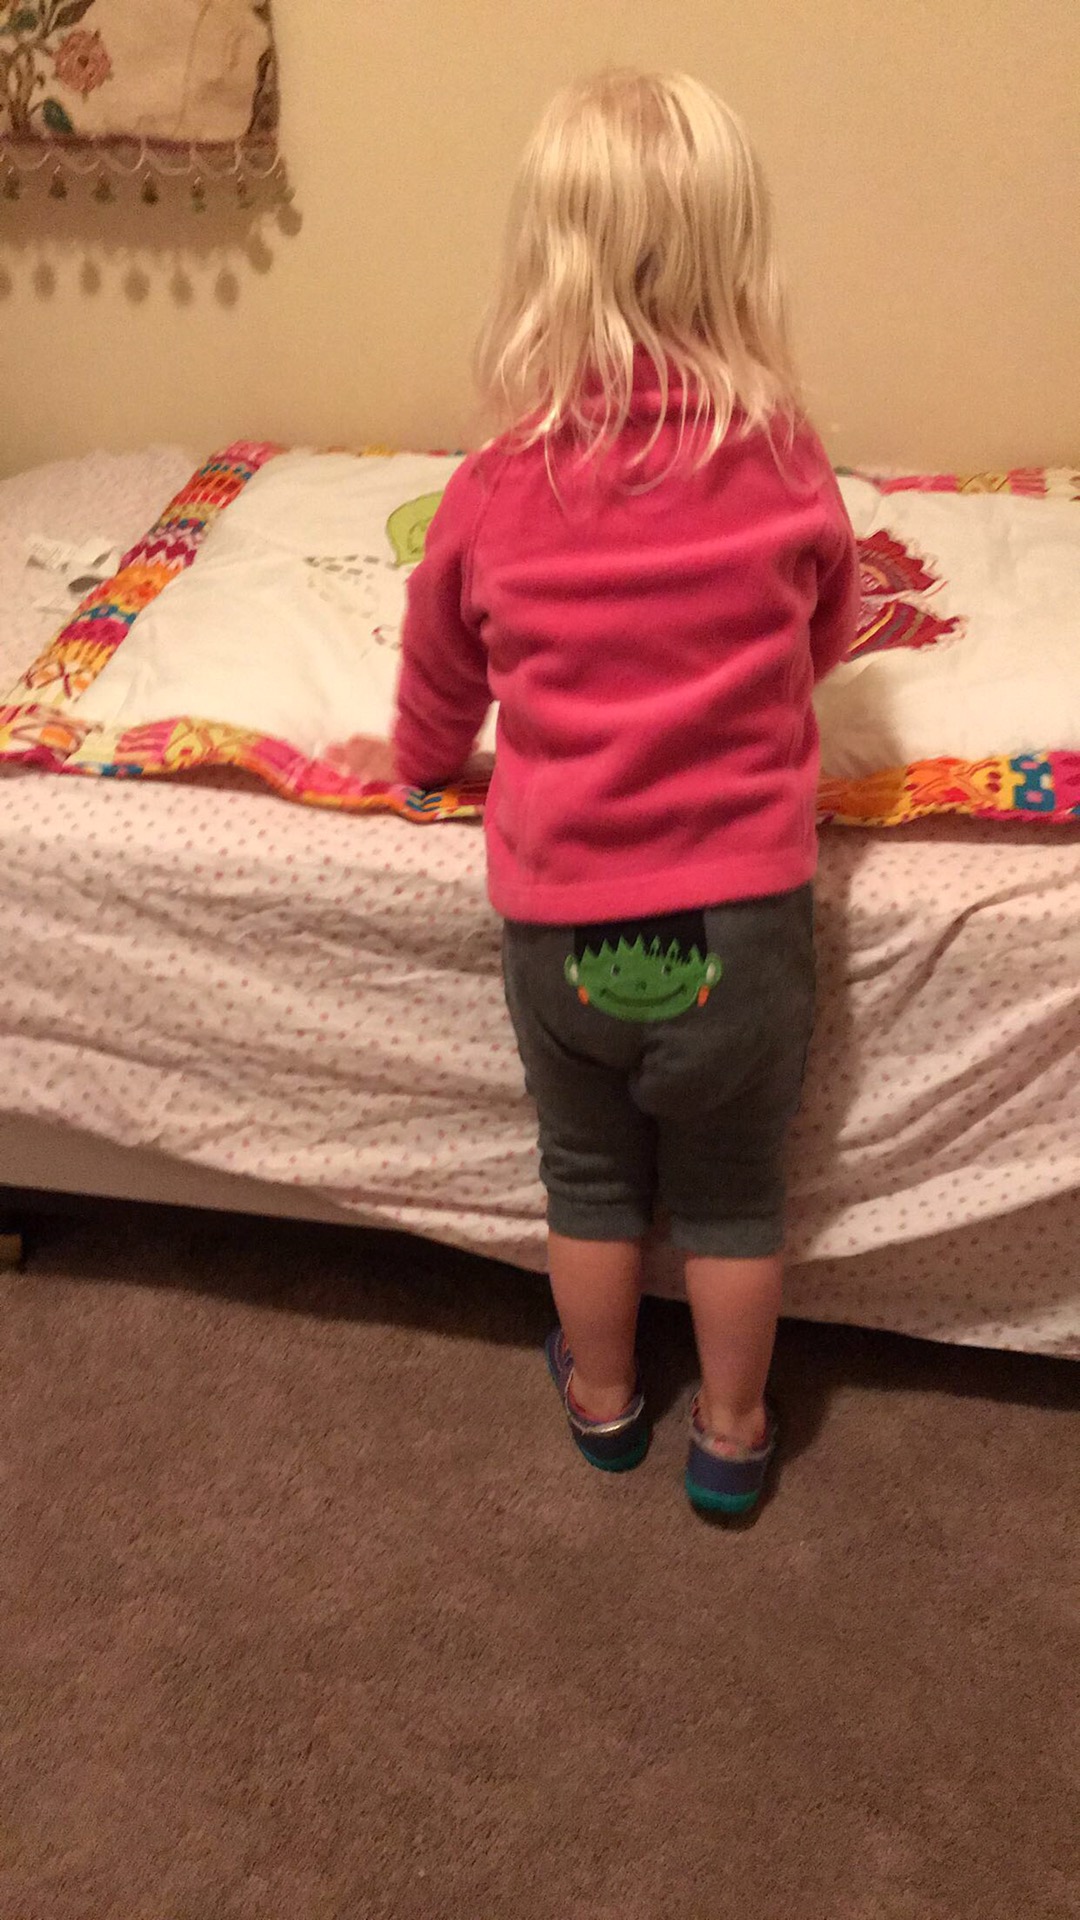 Little Girl Peeing In Her Pants